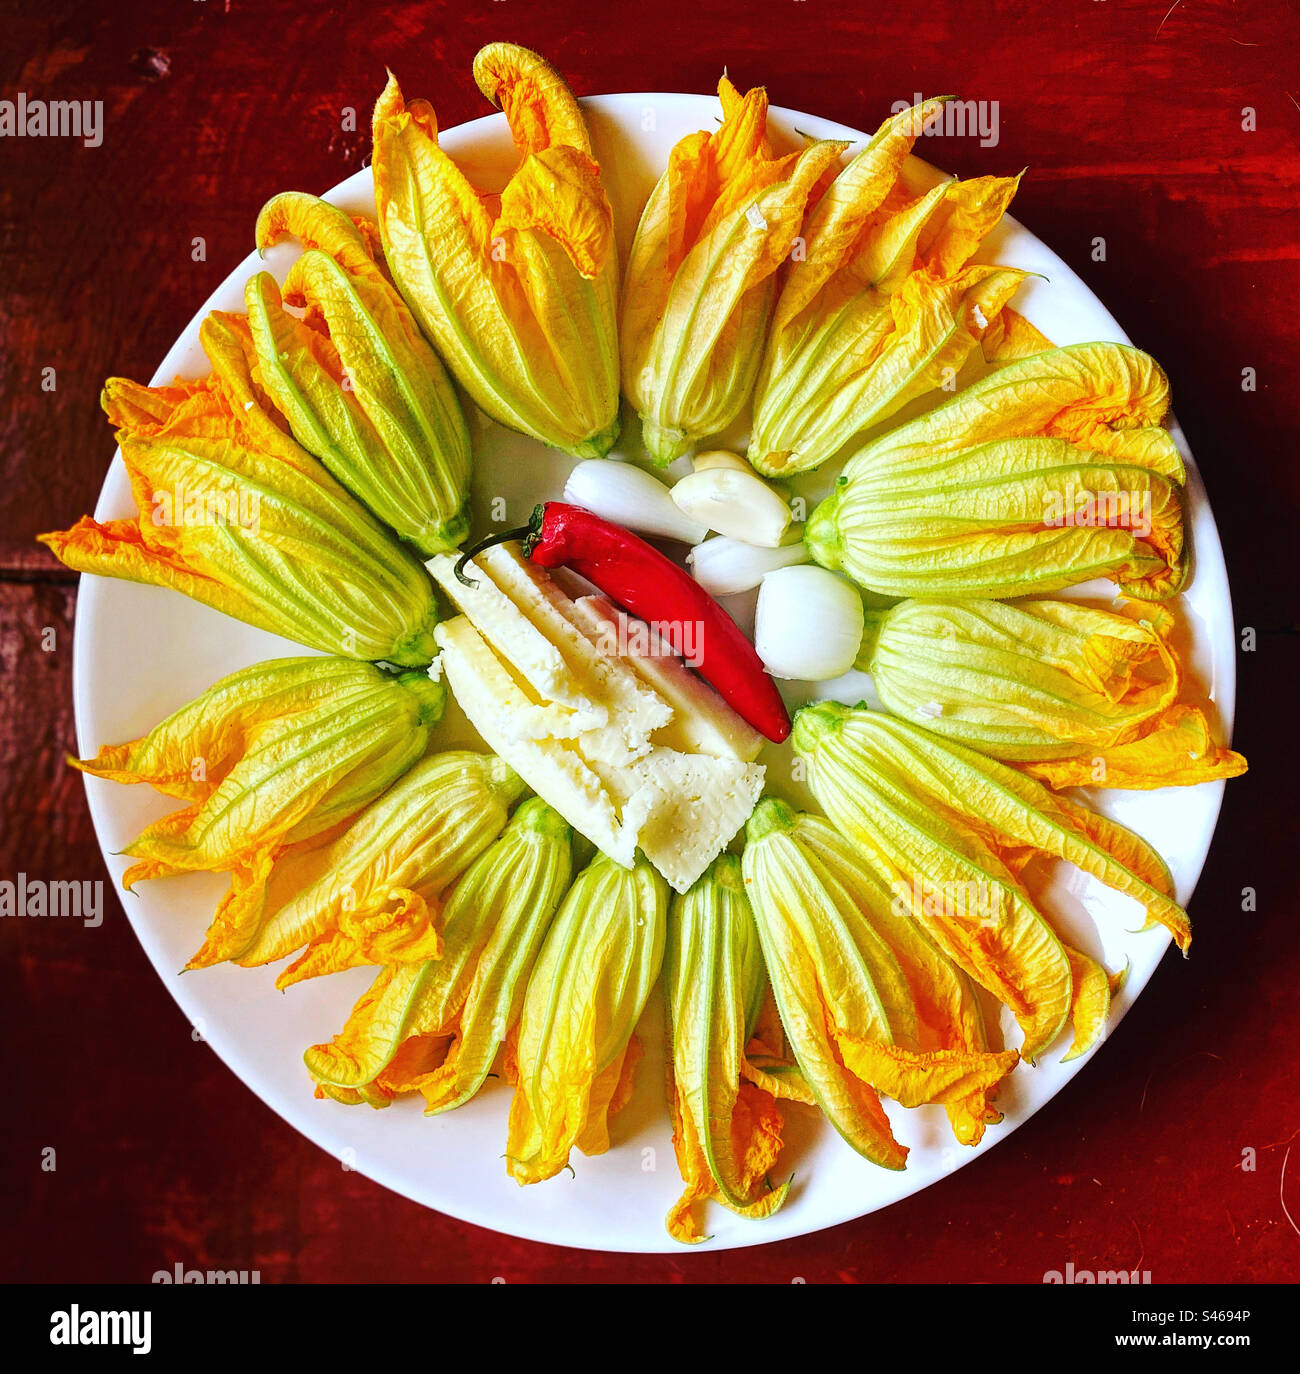 Pumpkin flowers, chesse, a red hot chilli pepper and onion ready to be grilled in Mexico Stock Photo